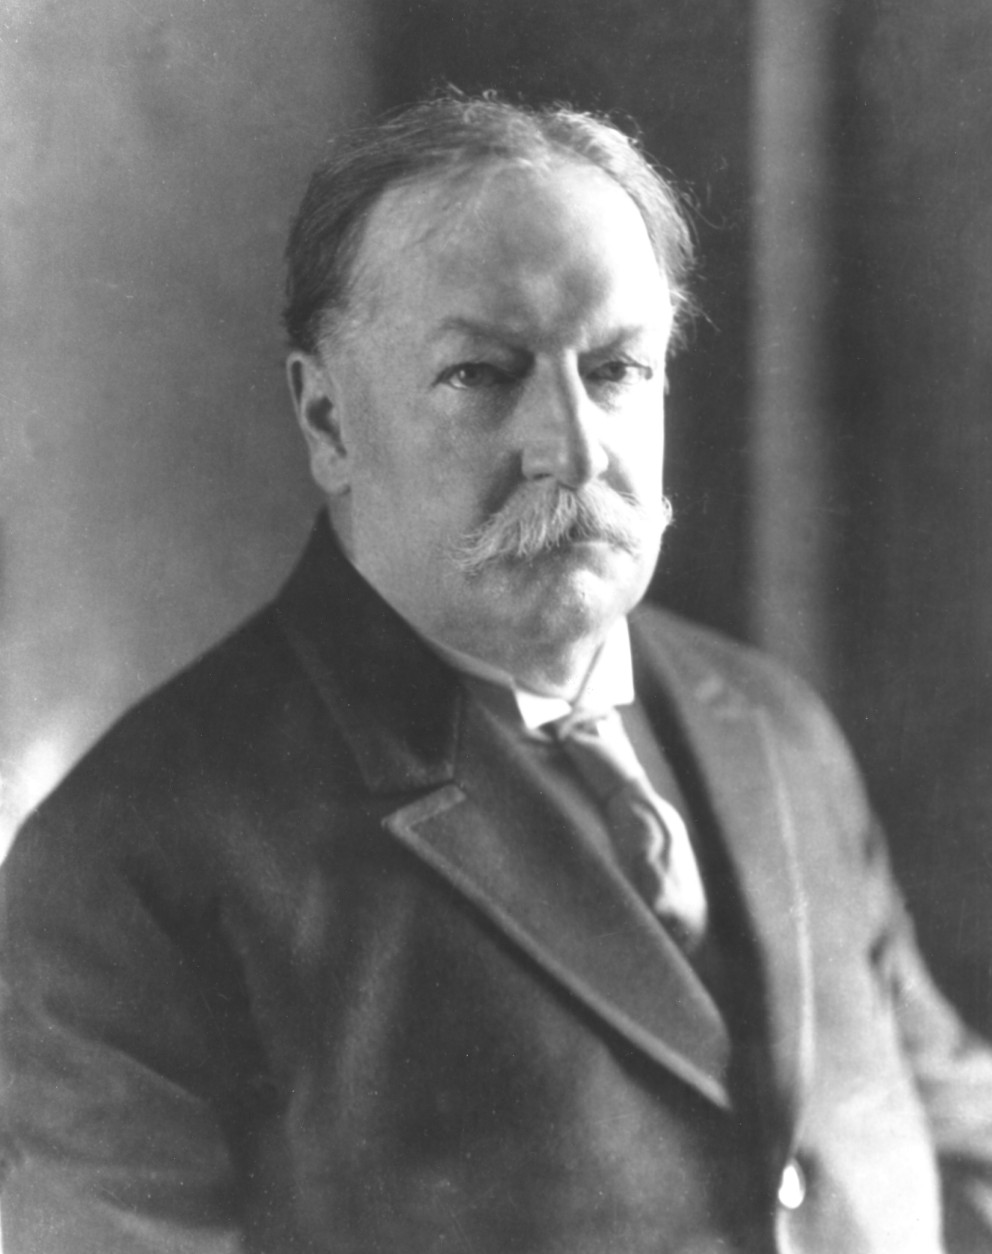 William Howard Taft, 27th President of the United States is shown in an undated photo. (AP Photo)